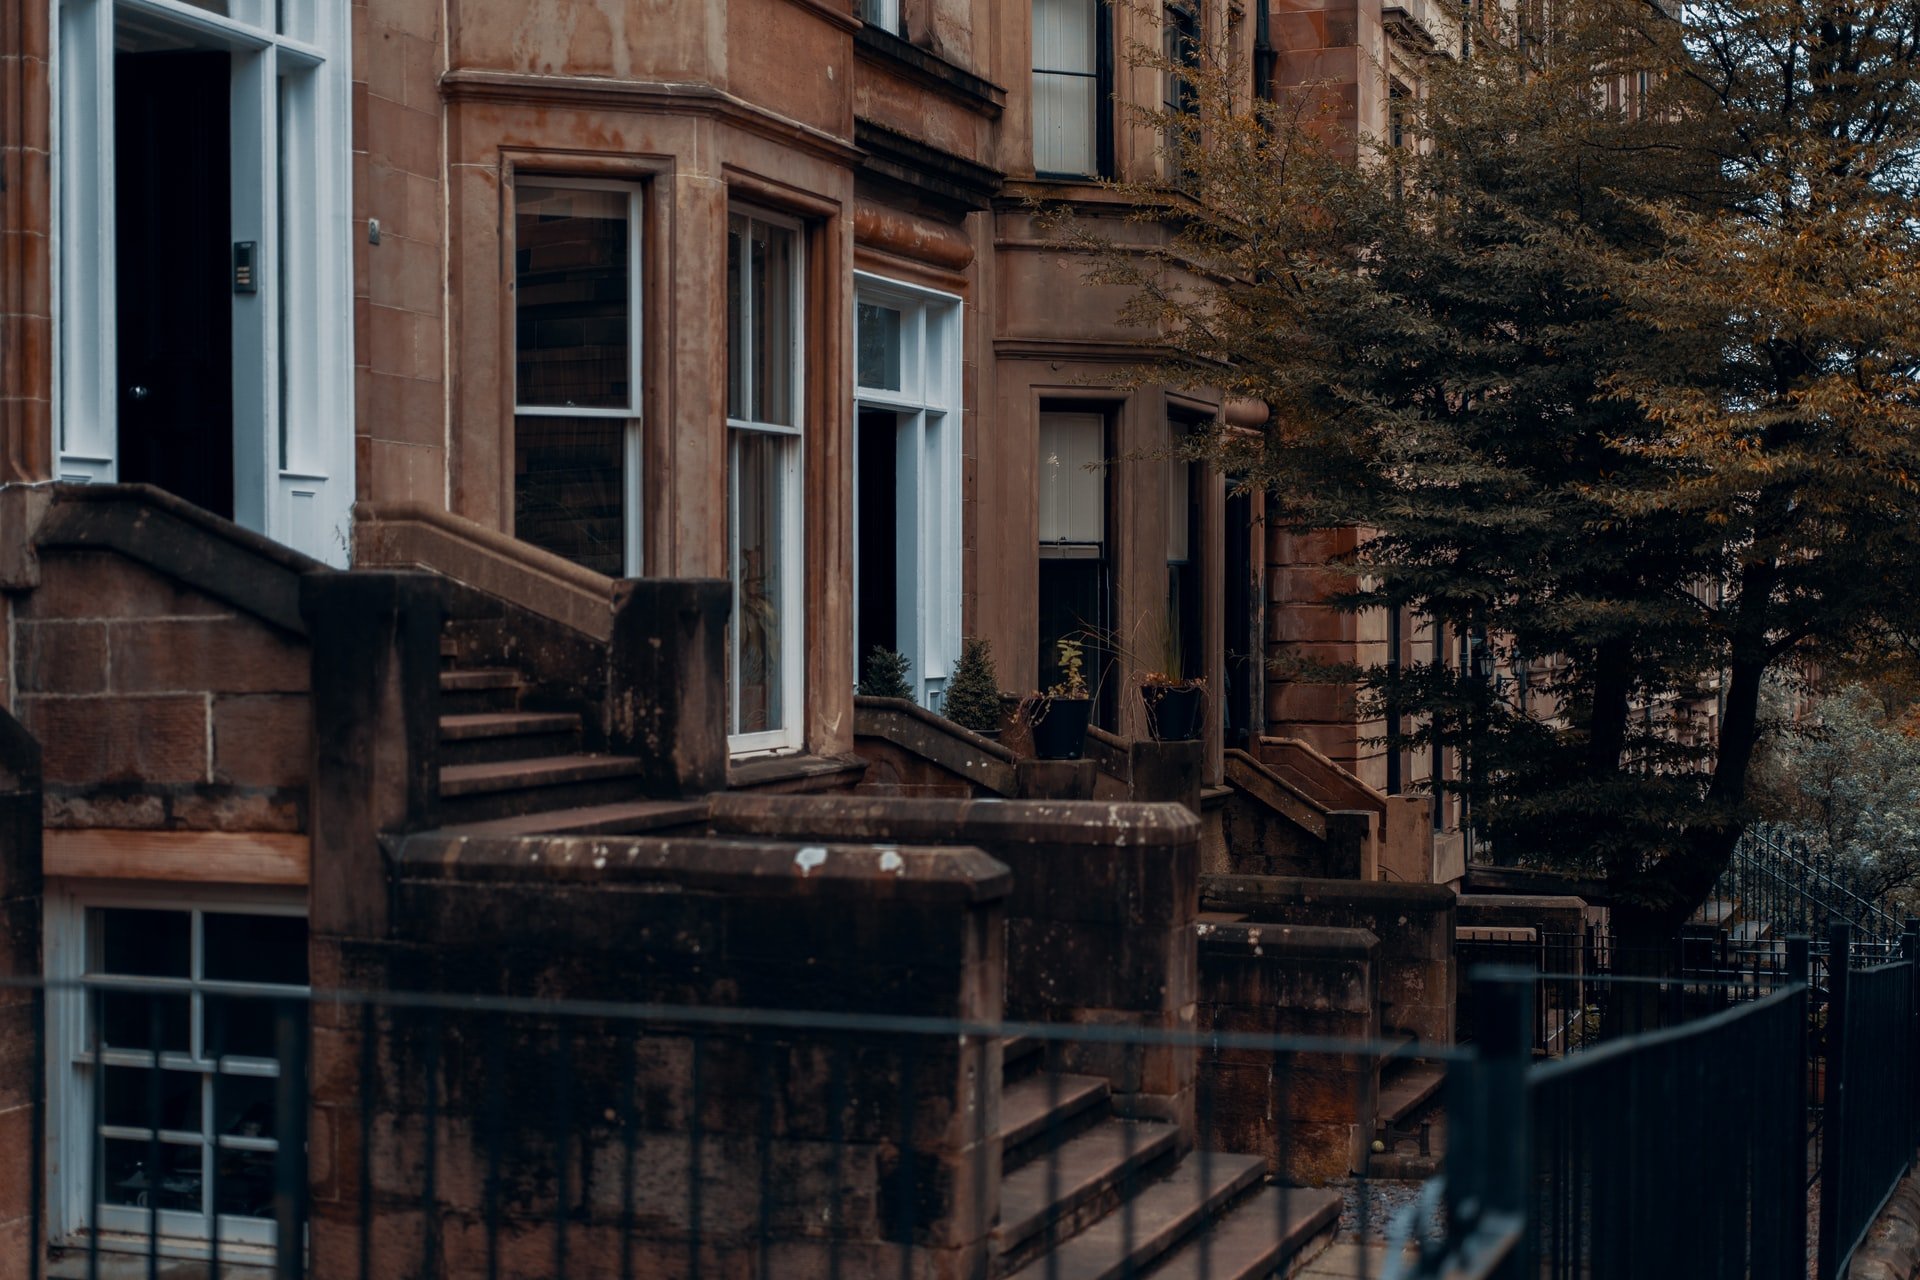 Glasgow tenements built with Old Red Sandstone